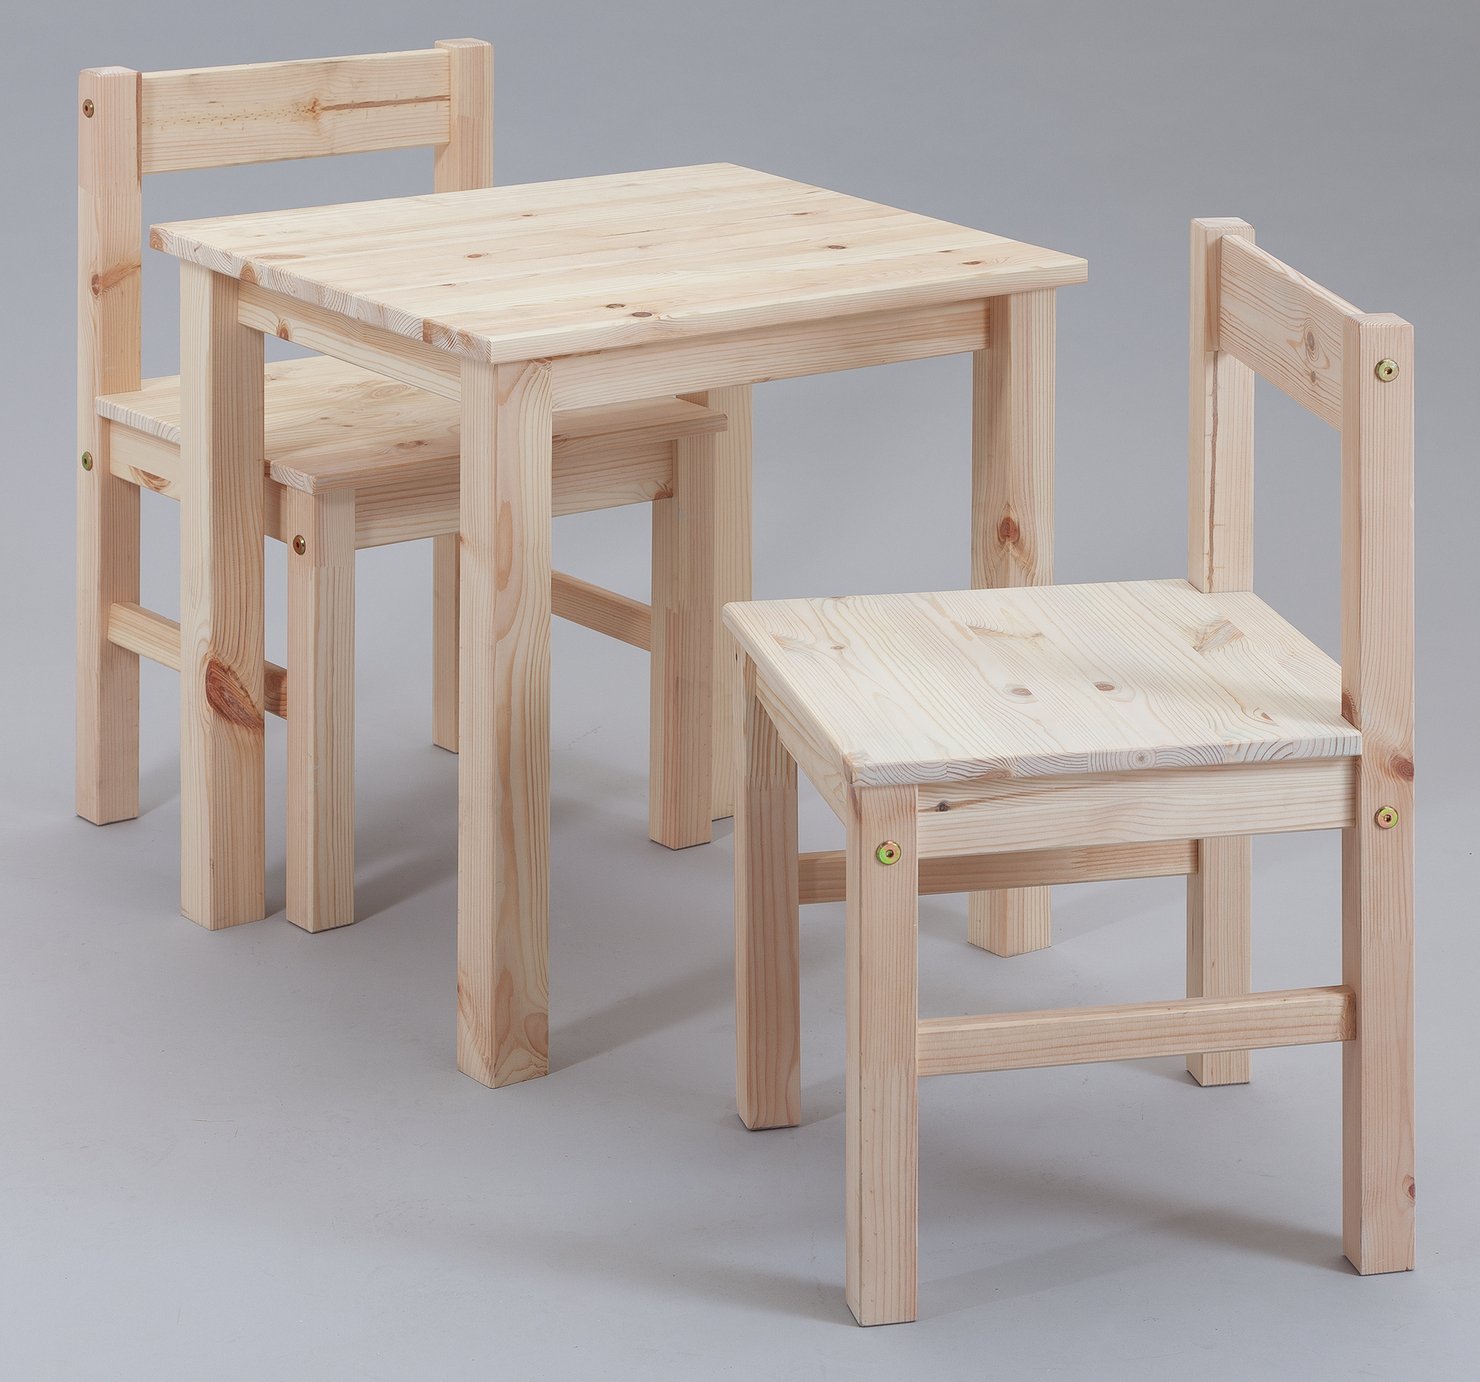 argos childrens wooden table and chairs